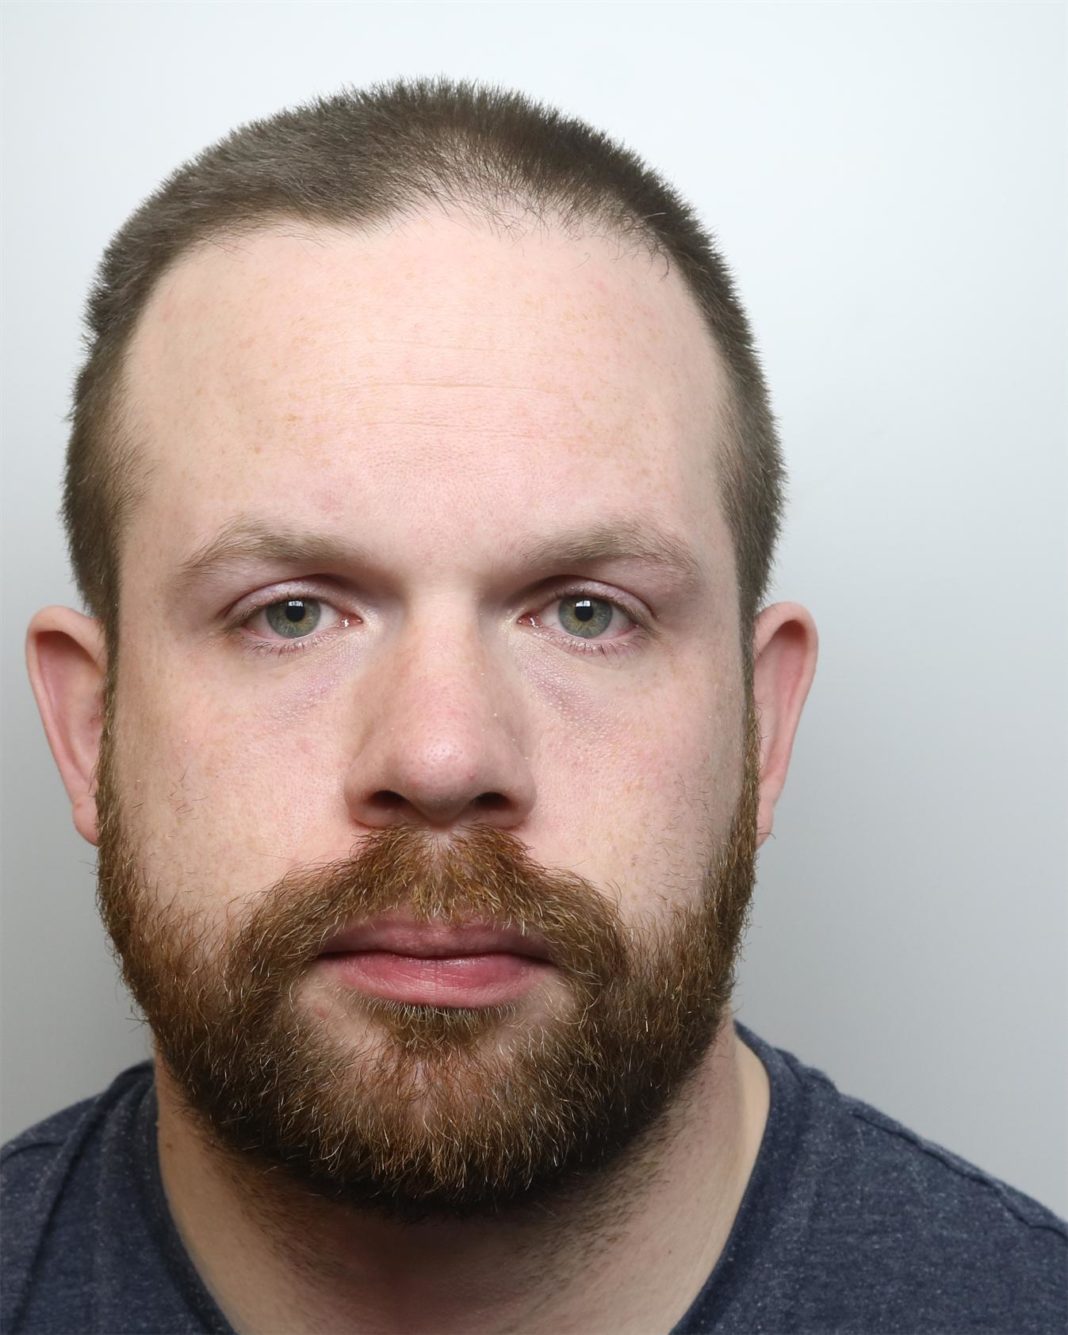 Police Officer Jailed In Manchester After He Slept With A Women He Had Arrested For Drink